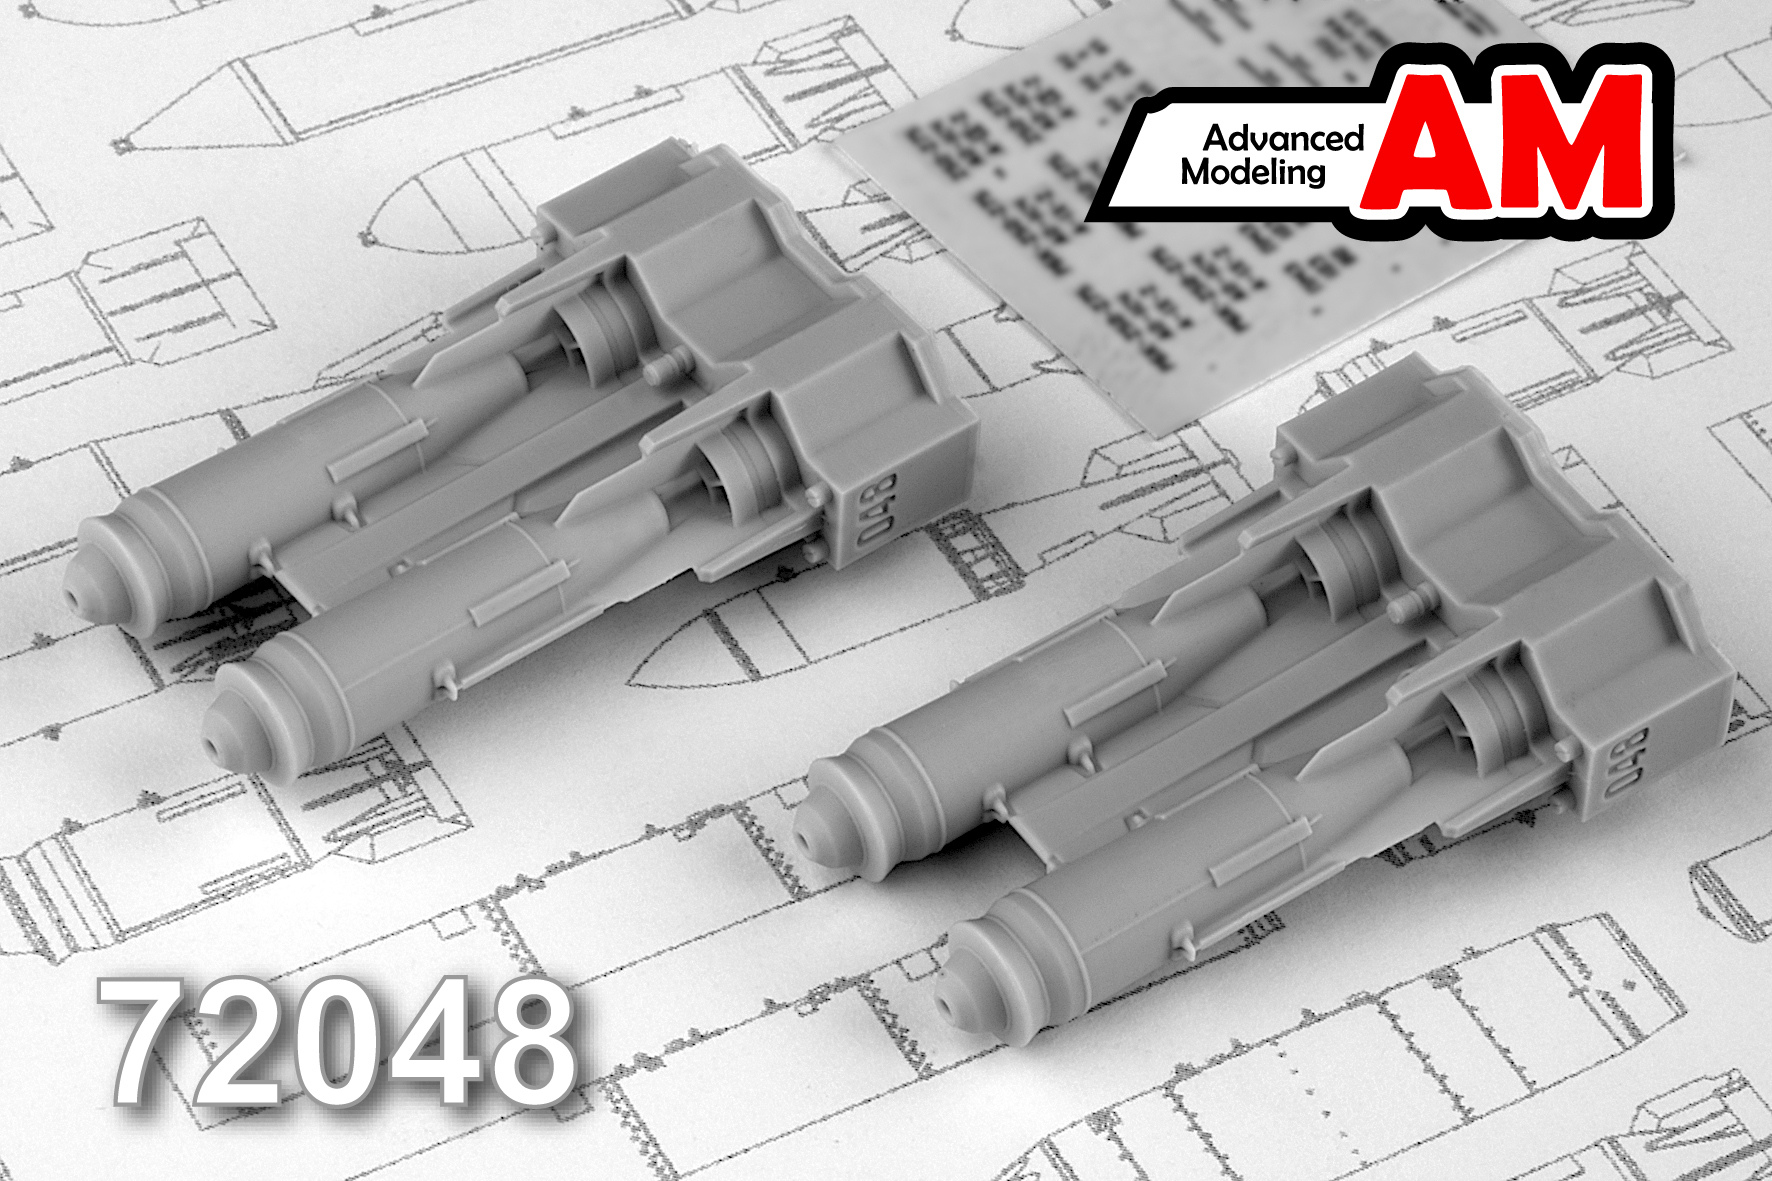 Additions (3D resin printing) 1/72 FAB-250 M-54 High-Explosive 250 kg bomb (Advanced Modeling) 